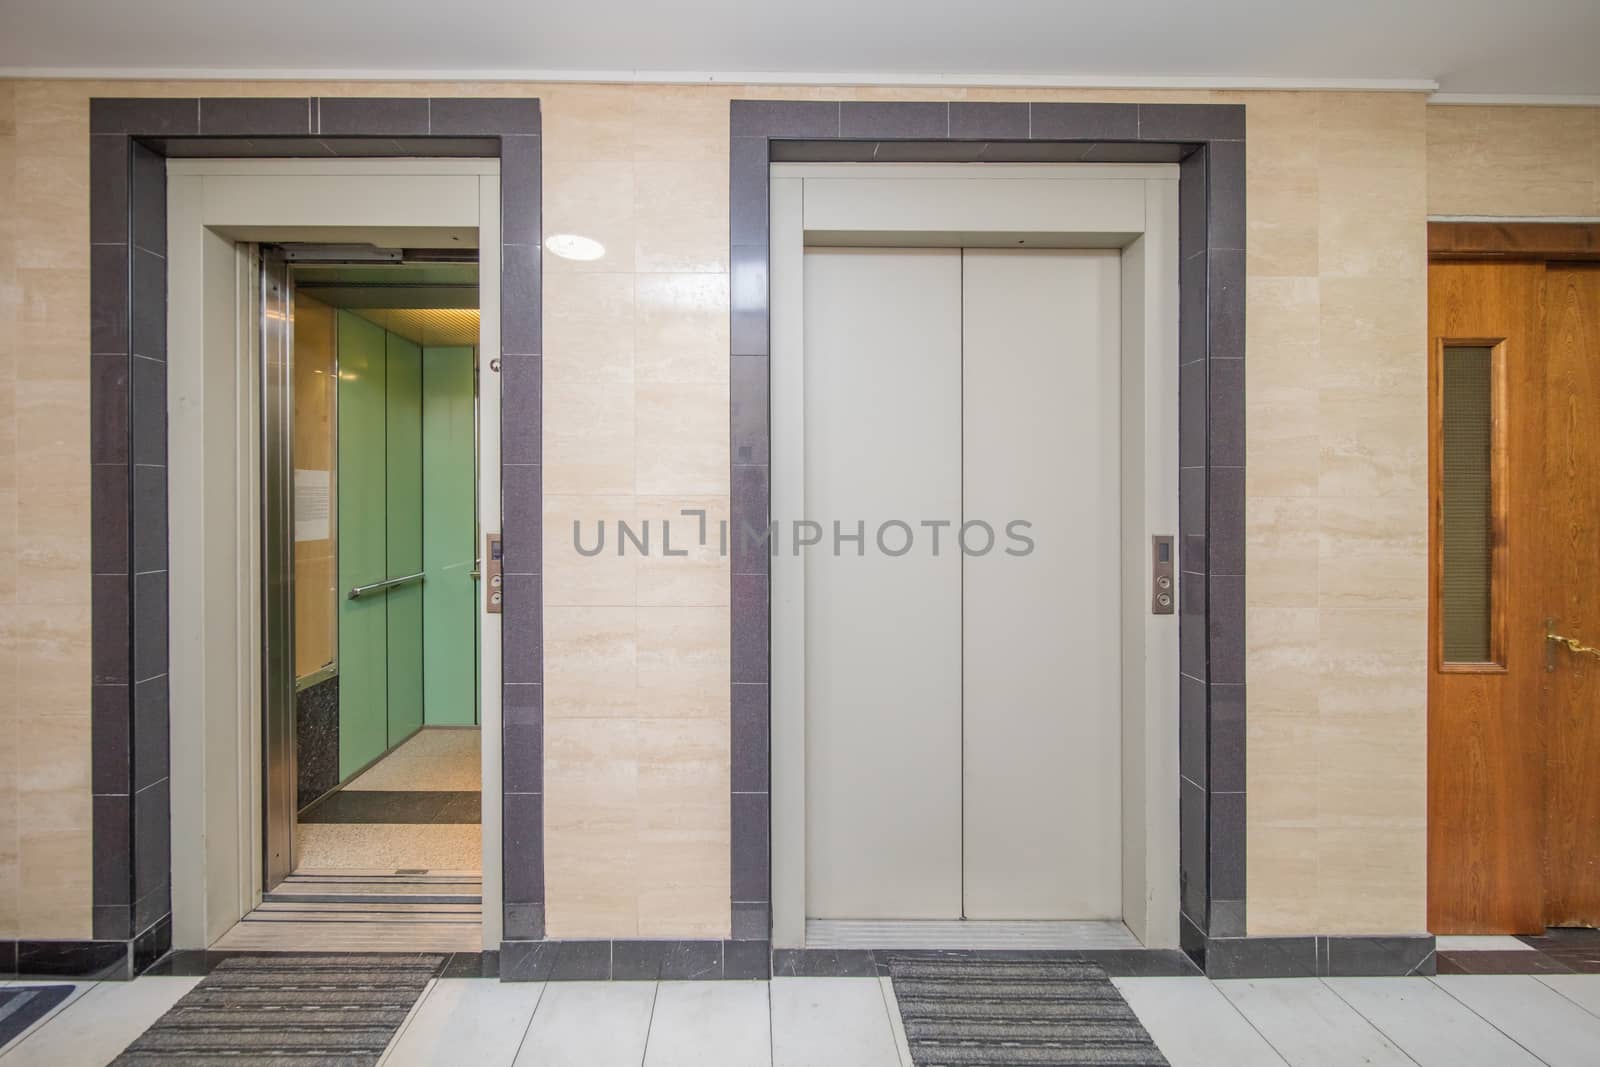 empty modern elevator or lift with open and closed metal doors